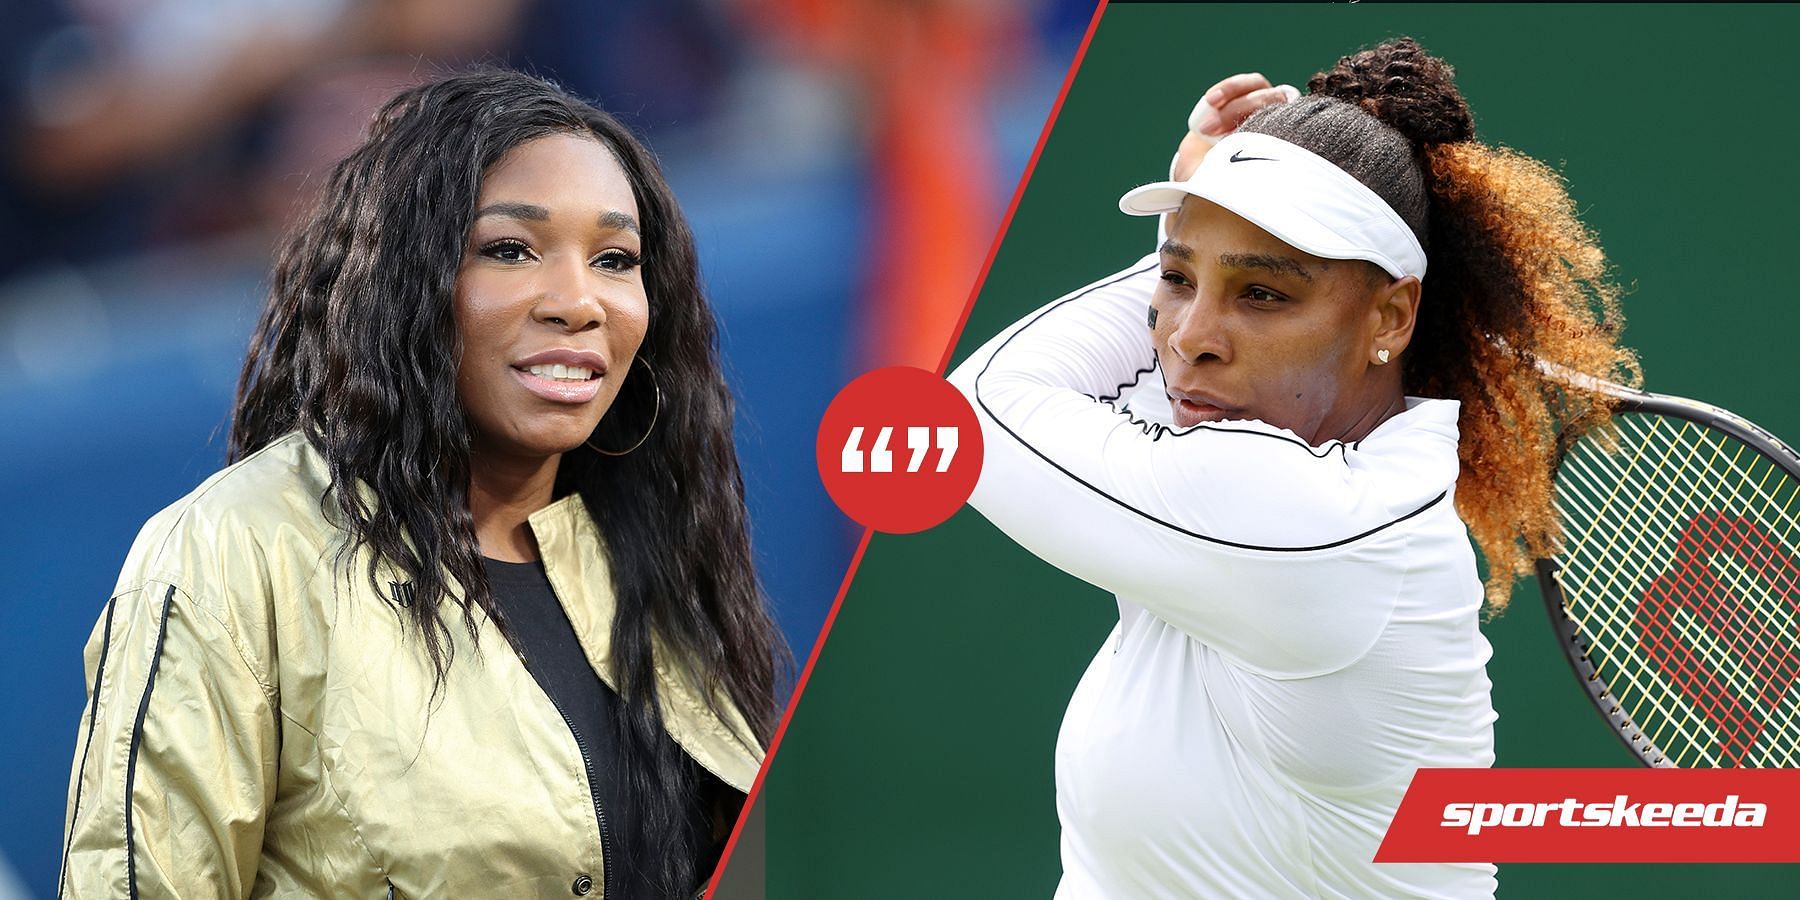 Serena Williams is returning after a year